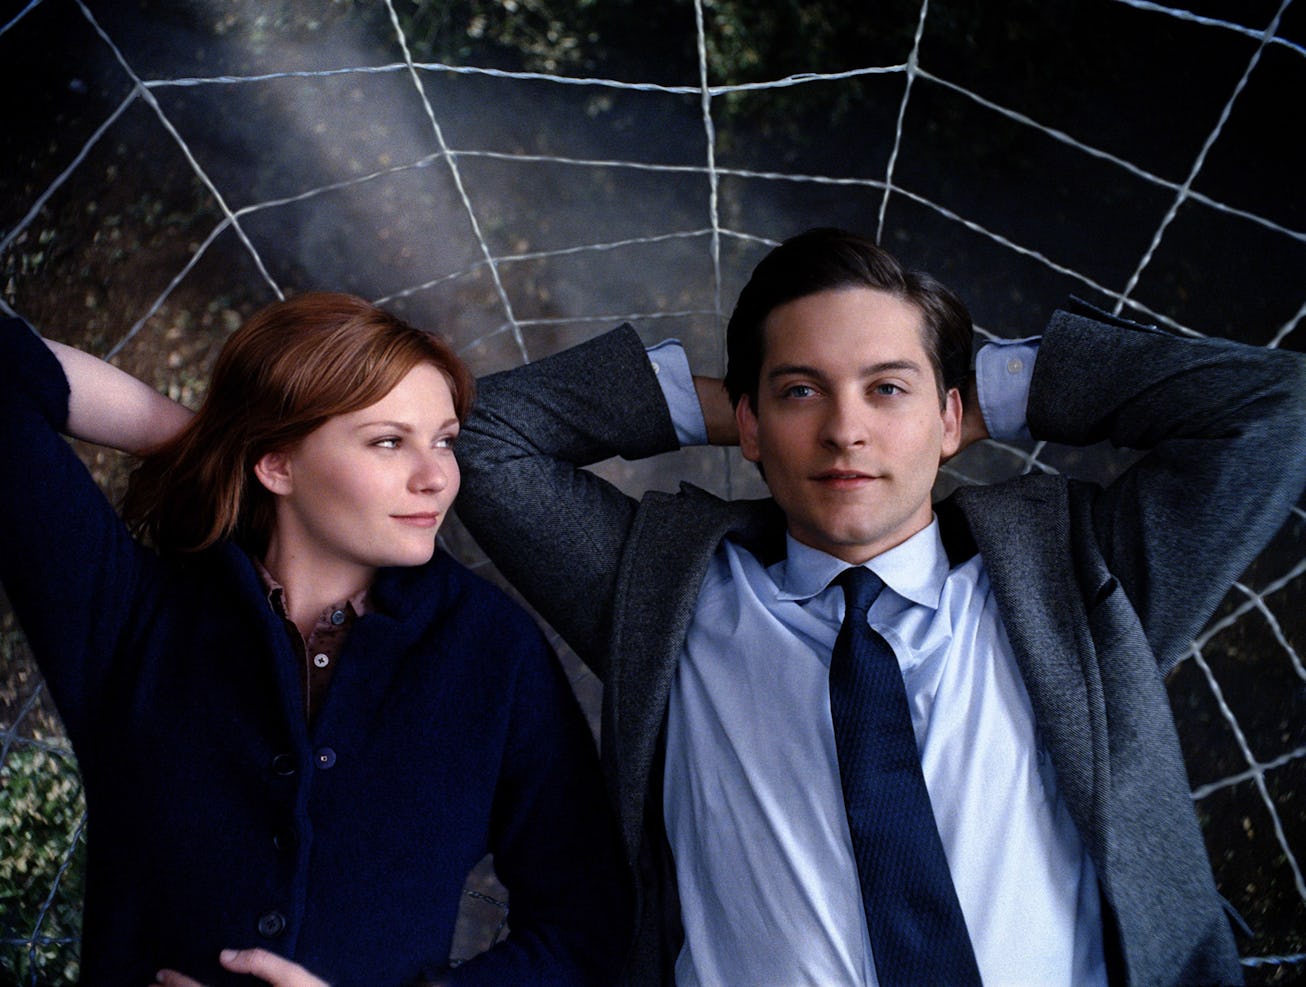 Kirsten Dunst says she and Tobey Maguire had an extreme pay gap on Spider-Man